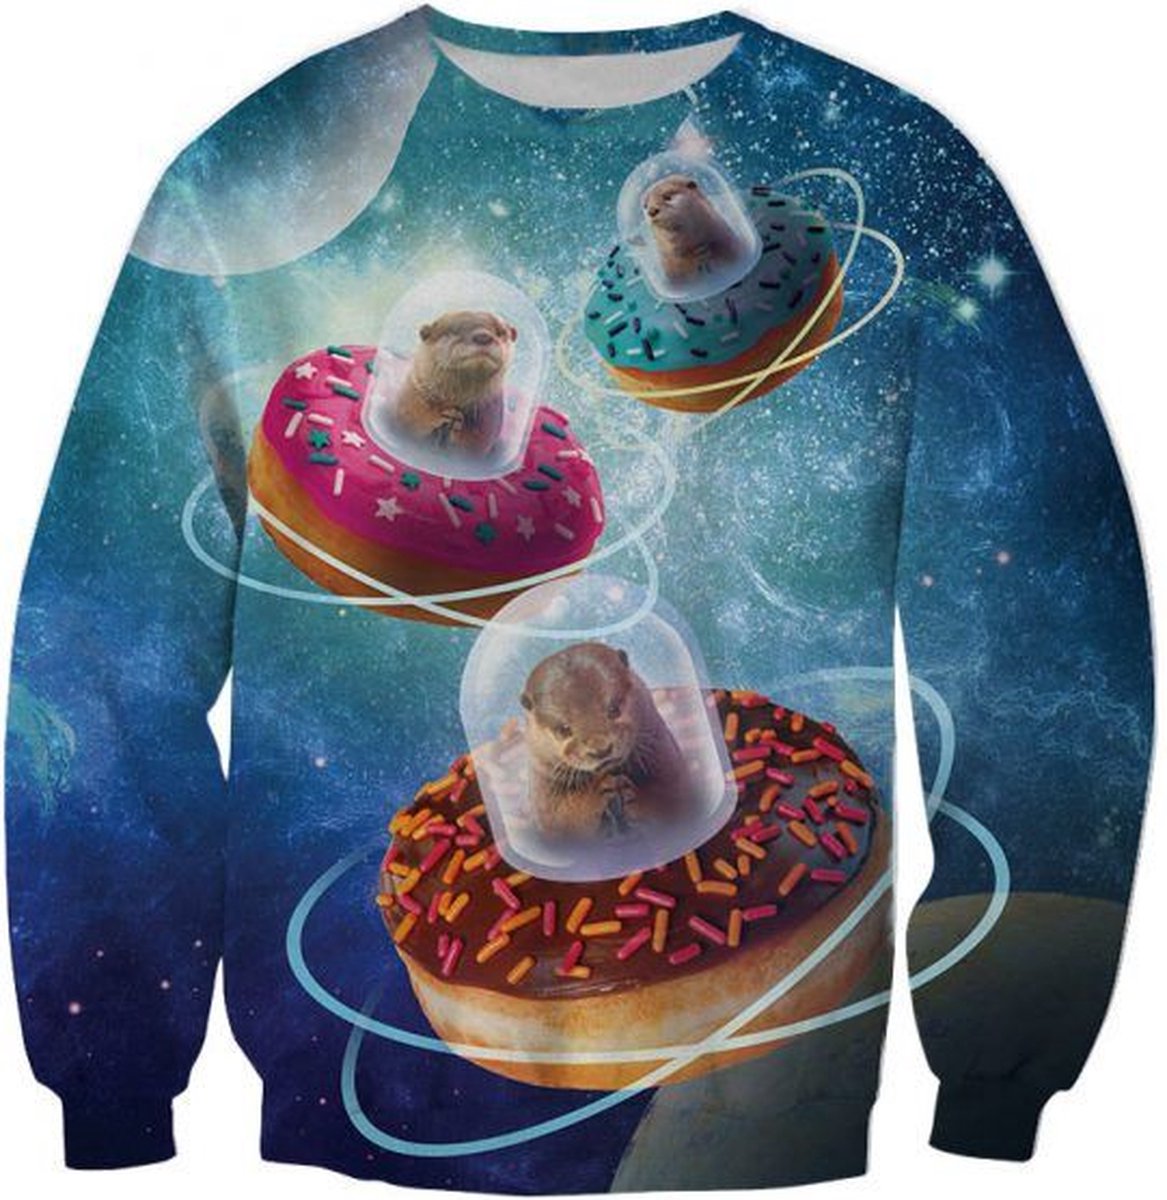 Otters in Donut UFO's - Maat L - Festival Trui - Superfout - Foute Trui - Feestkleding - Festival outfit - Foute kleding - Foute party kleding -